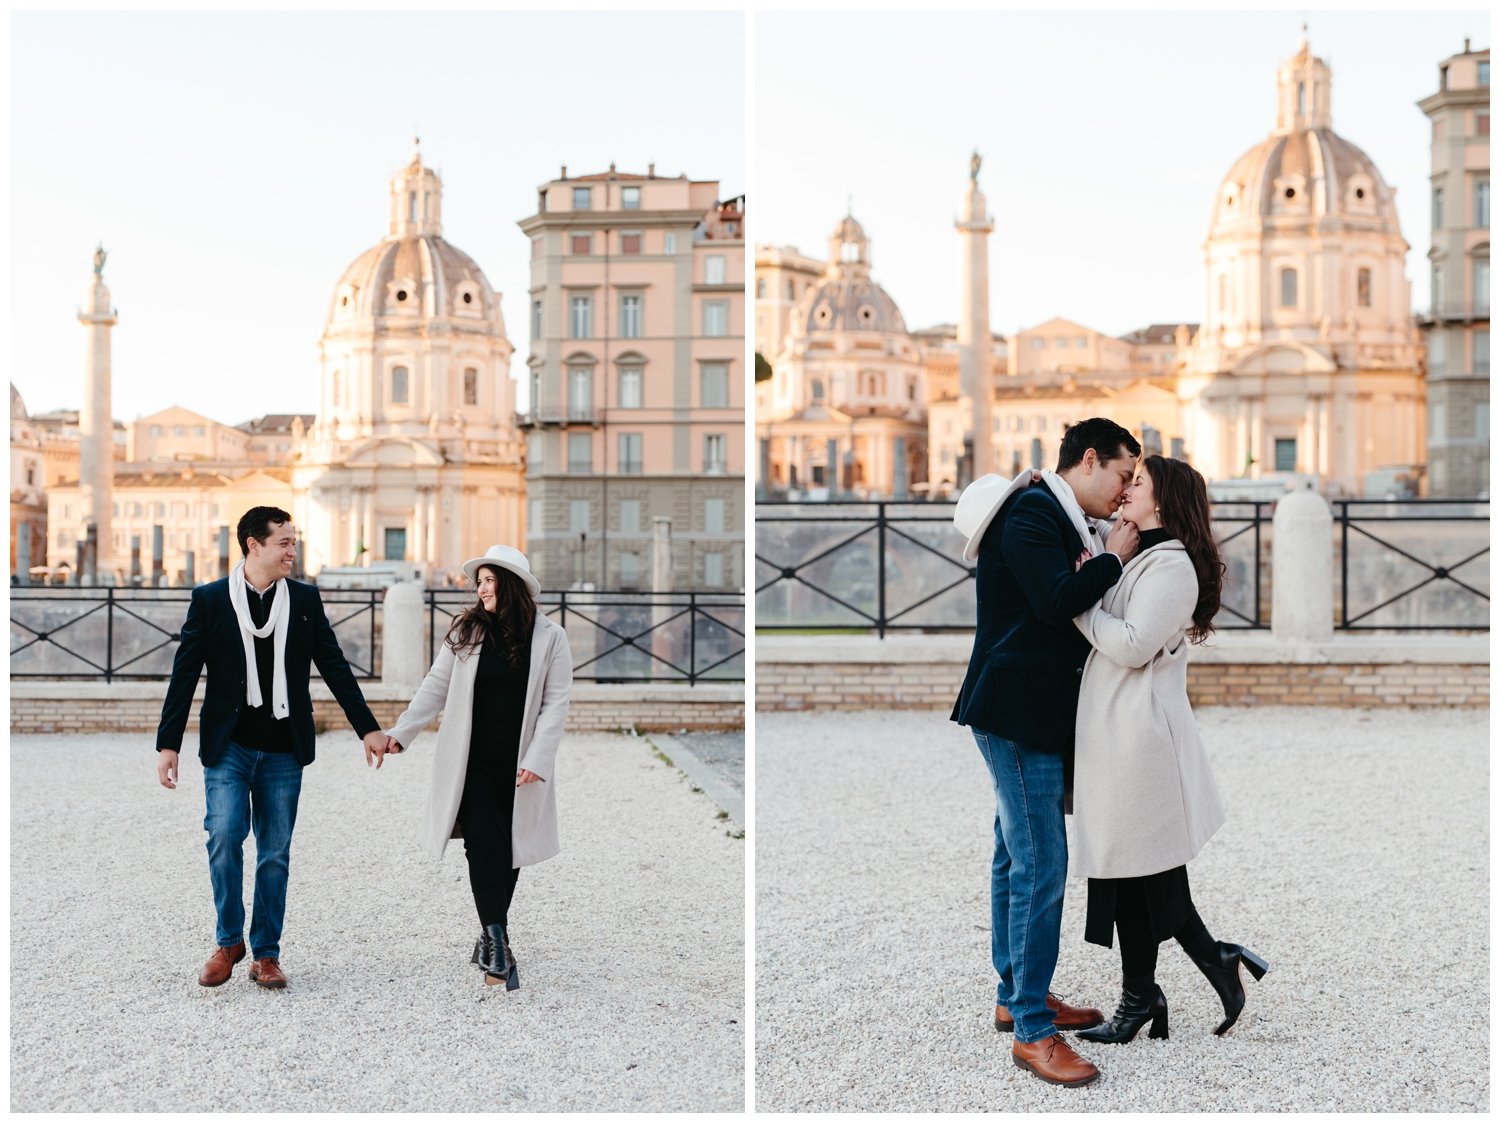 The couple walks in a plaza with the wedding photographer in Italy